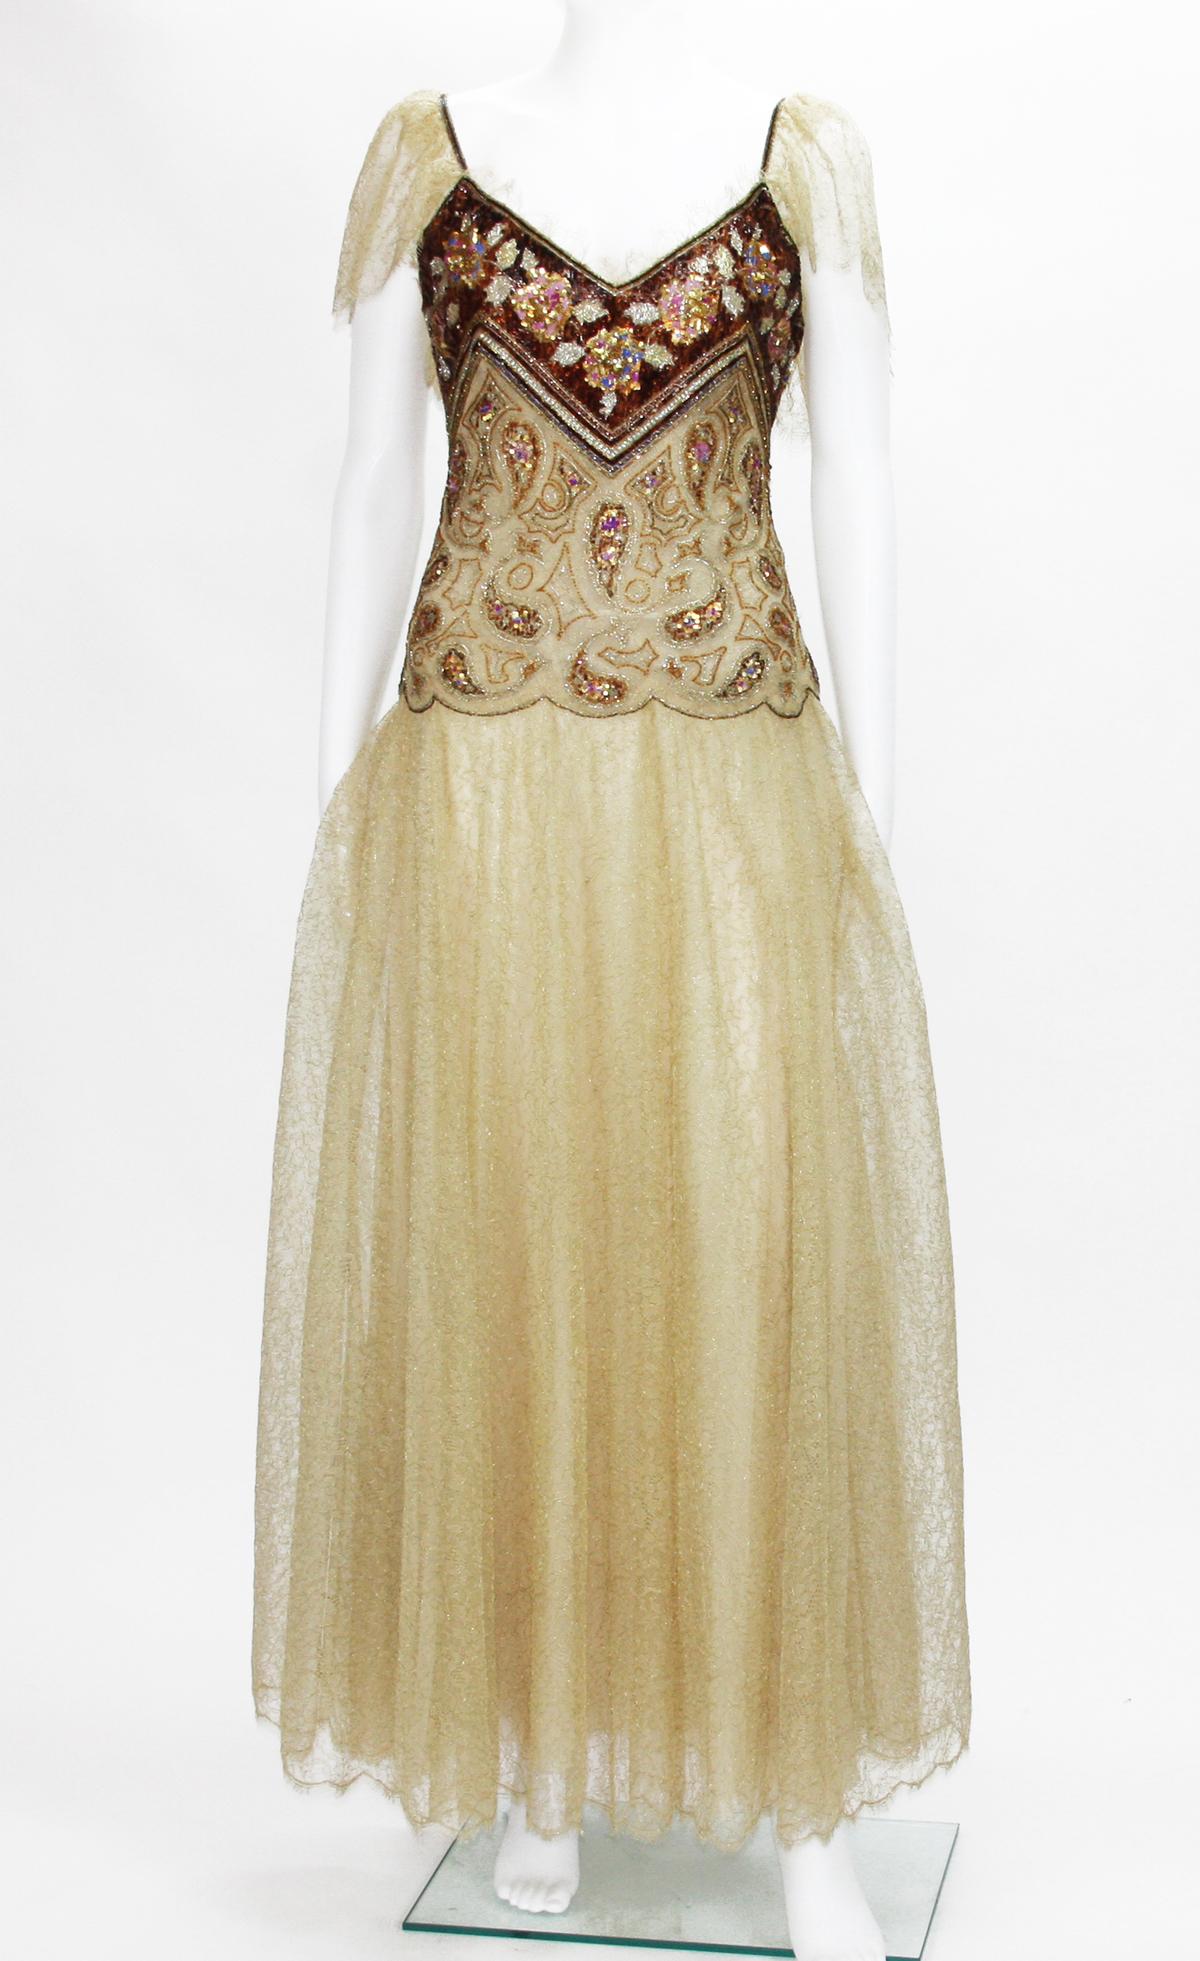 Christian Dior Automne-Hiver 1980 Dress
Embellished with beads and sequins. Lace has metal gold thread through. Boned bodice with attached interior waist belt. Triple skirt silk lining. Every level on corrugated scarf finished with gold tone